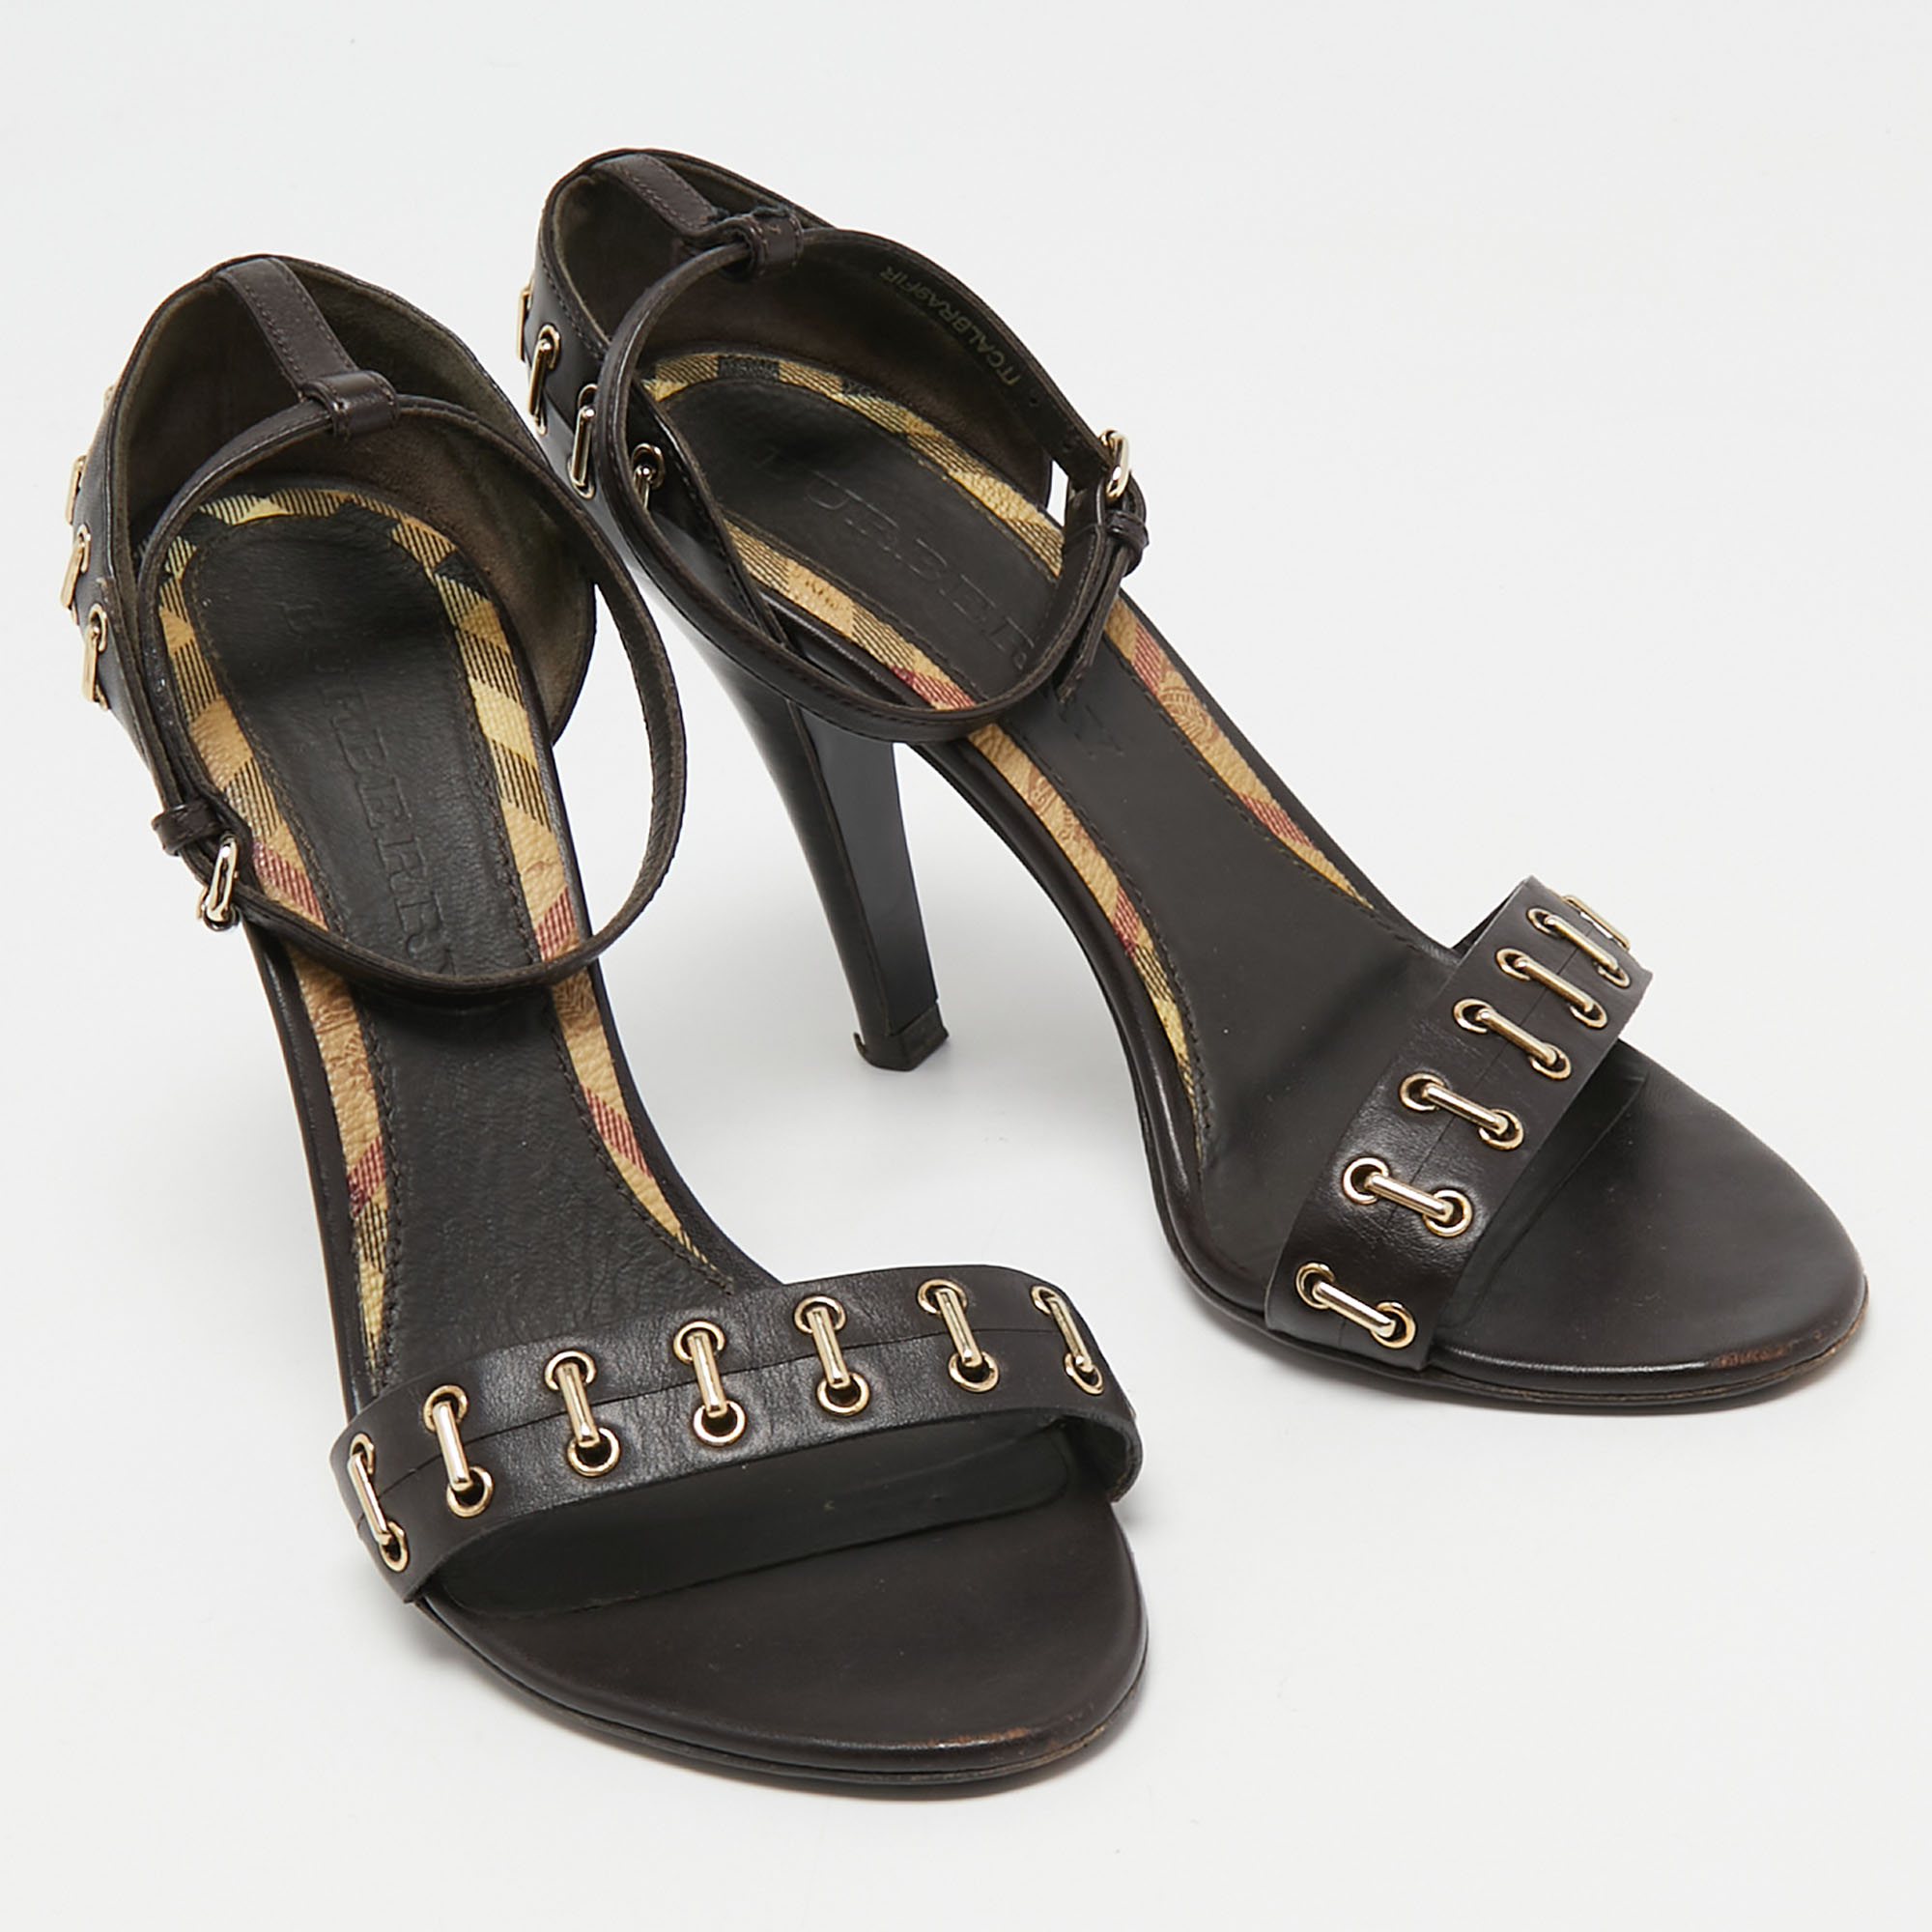 Burberry Dark Brown Leather Ankle Strap Sandals Size 36